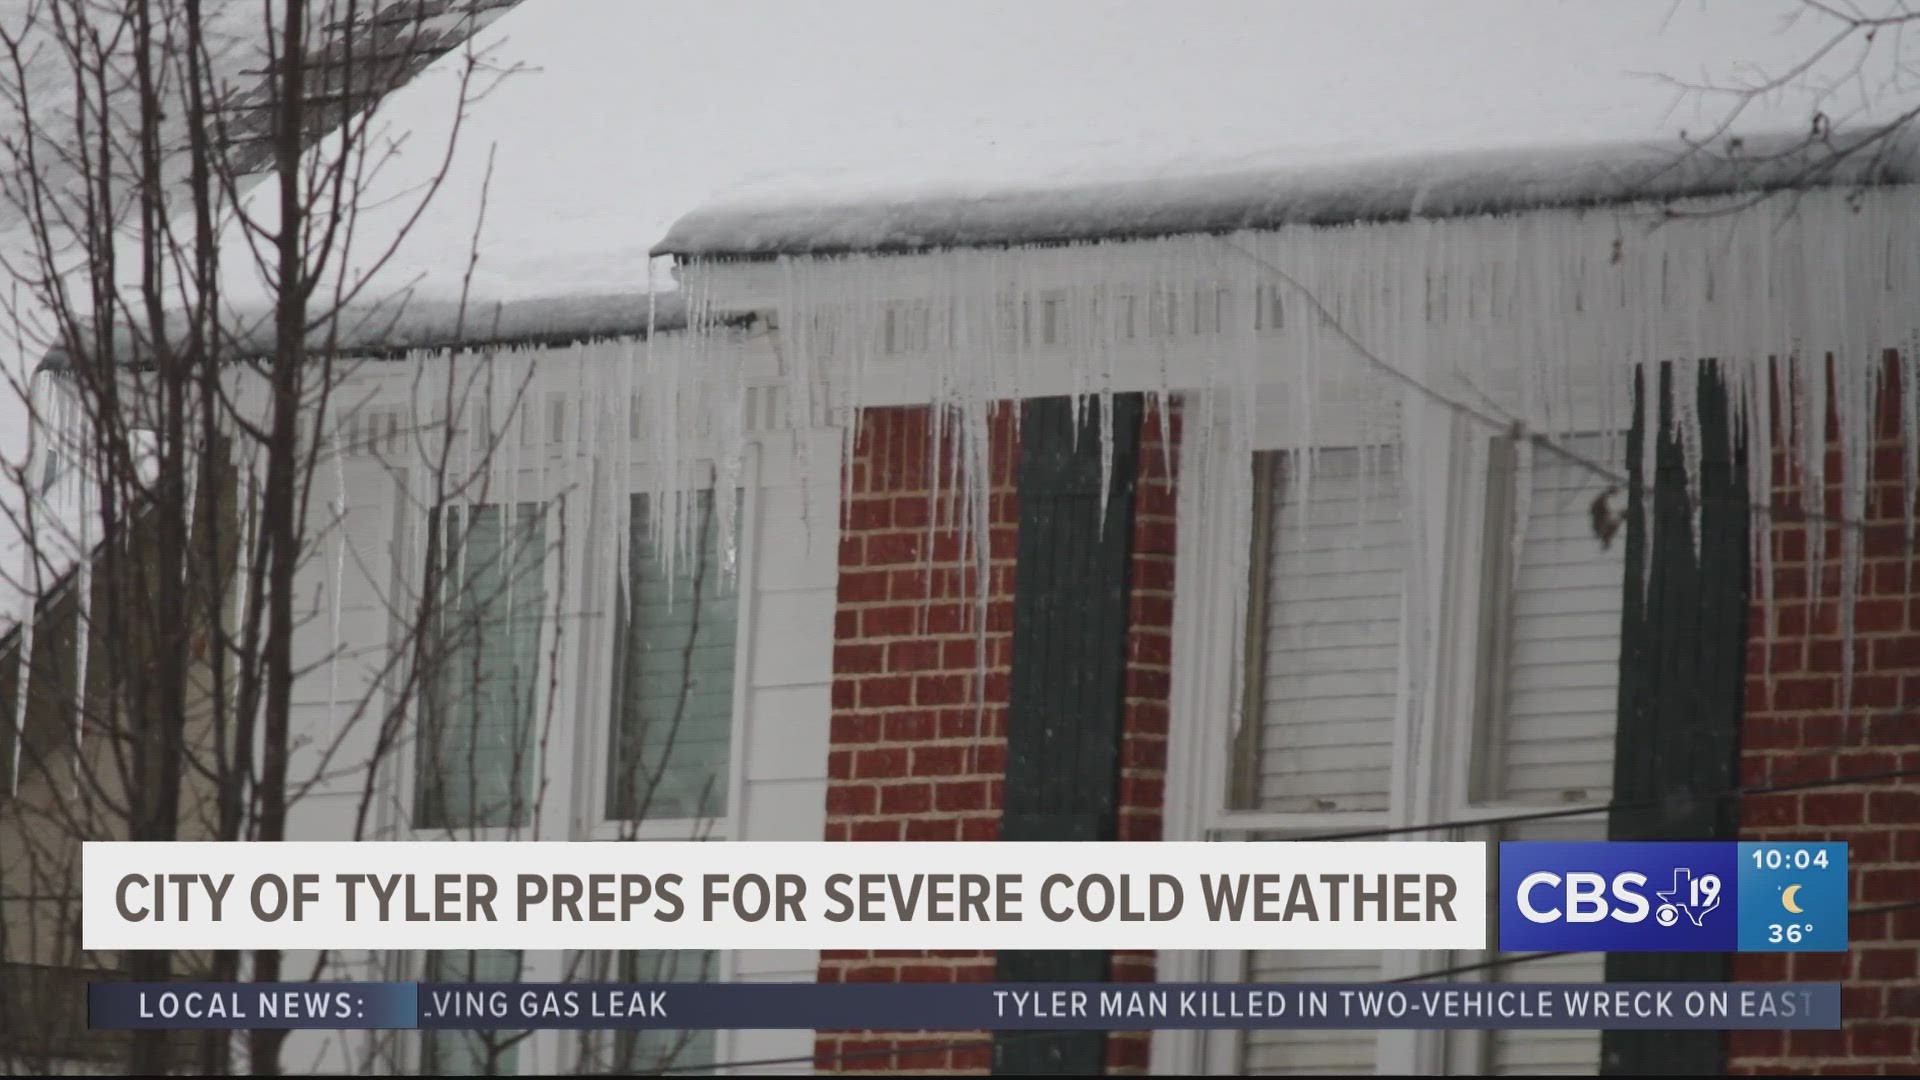 The city of Tyler is monitoring weather conditions and is prepared for freezing temperatures to hit east Texas.